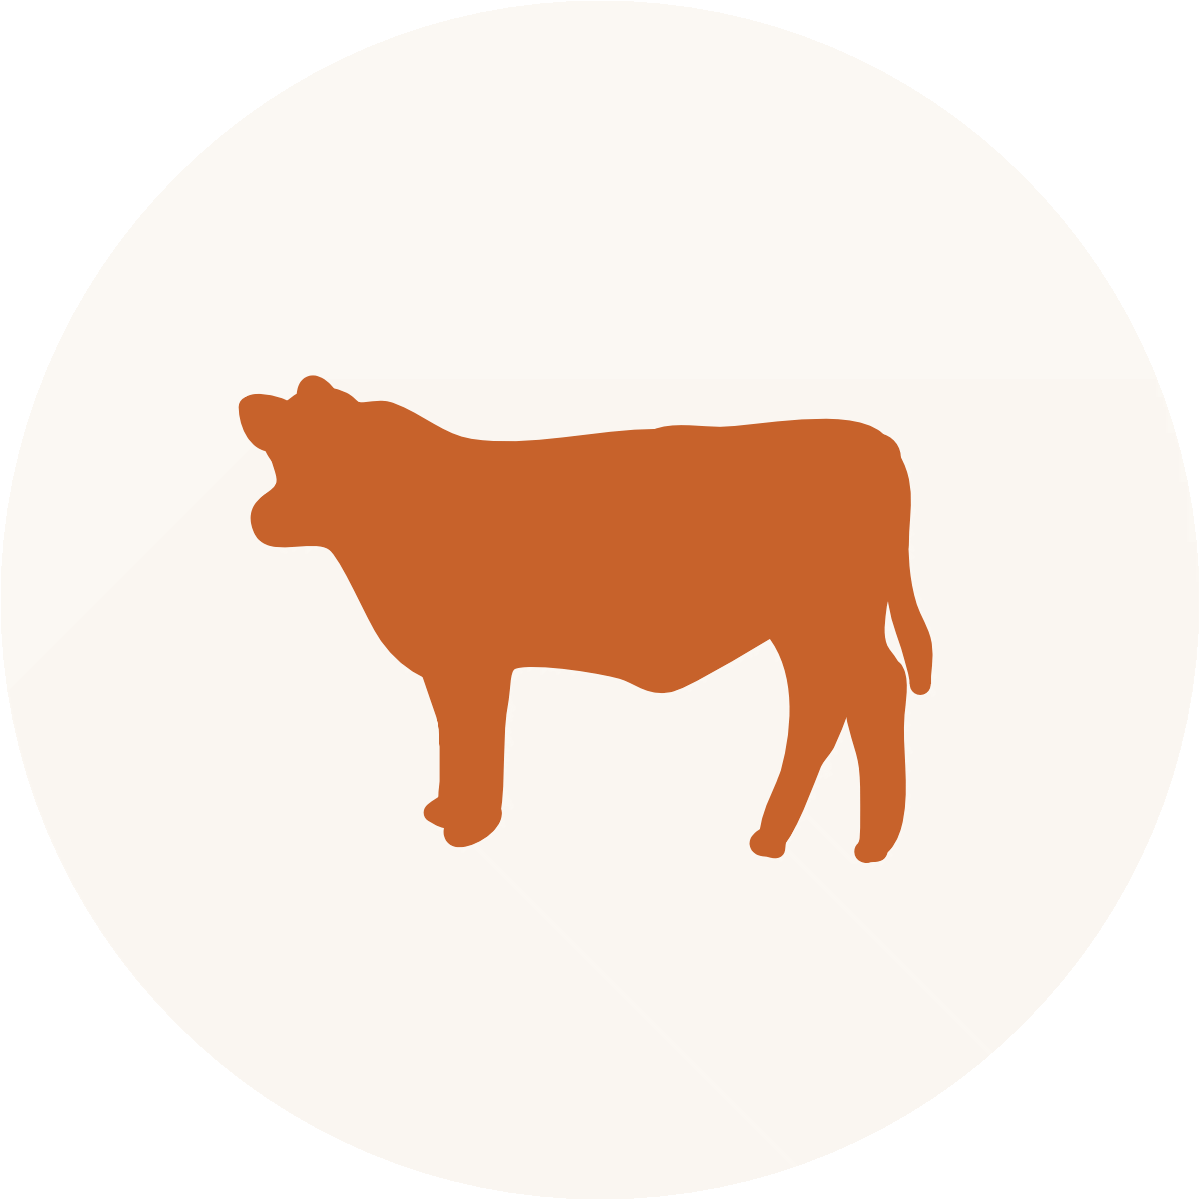 Clipart of an orange cow.